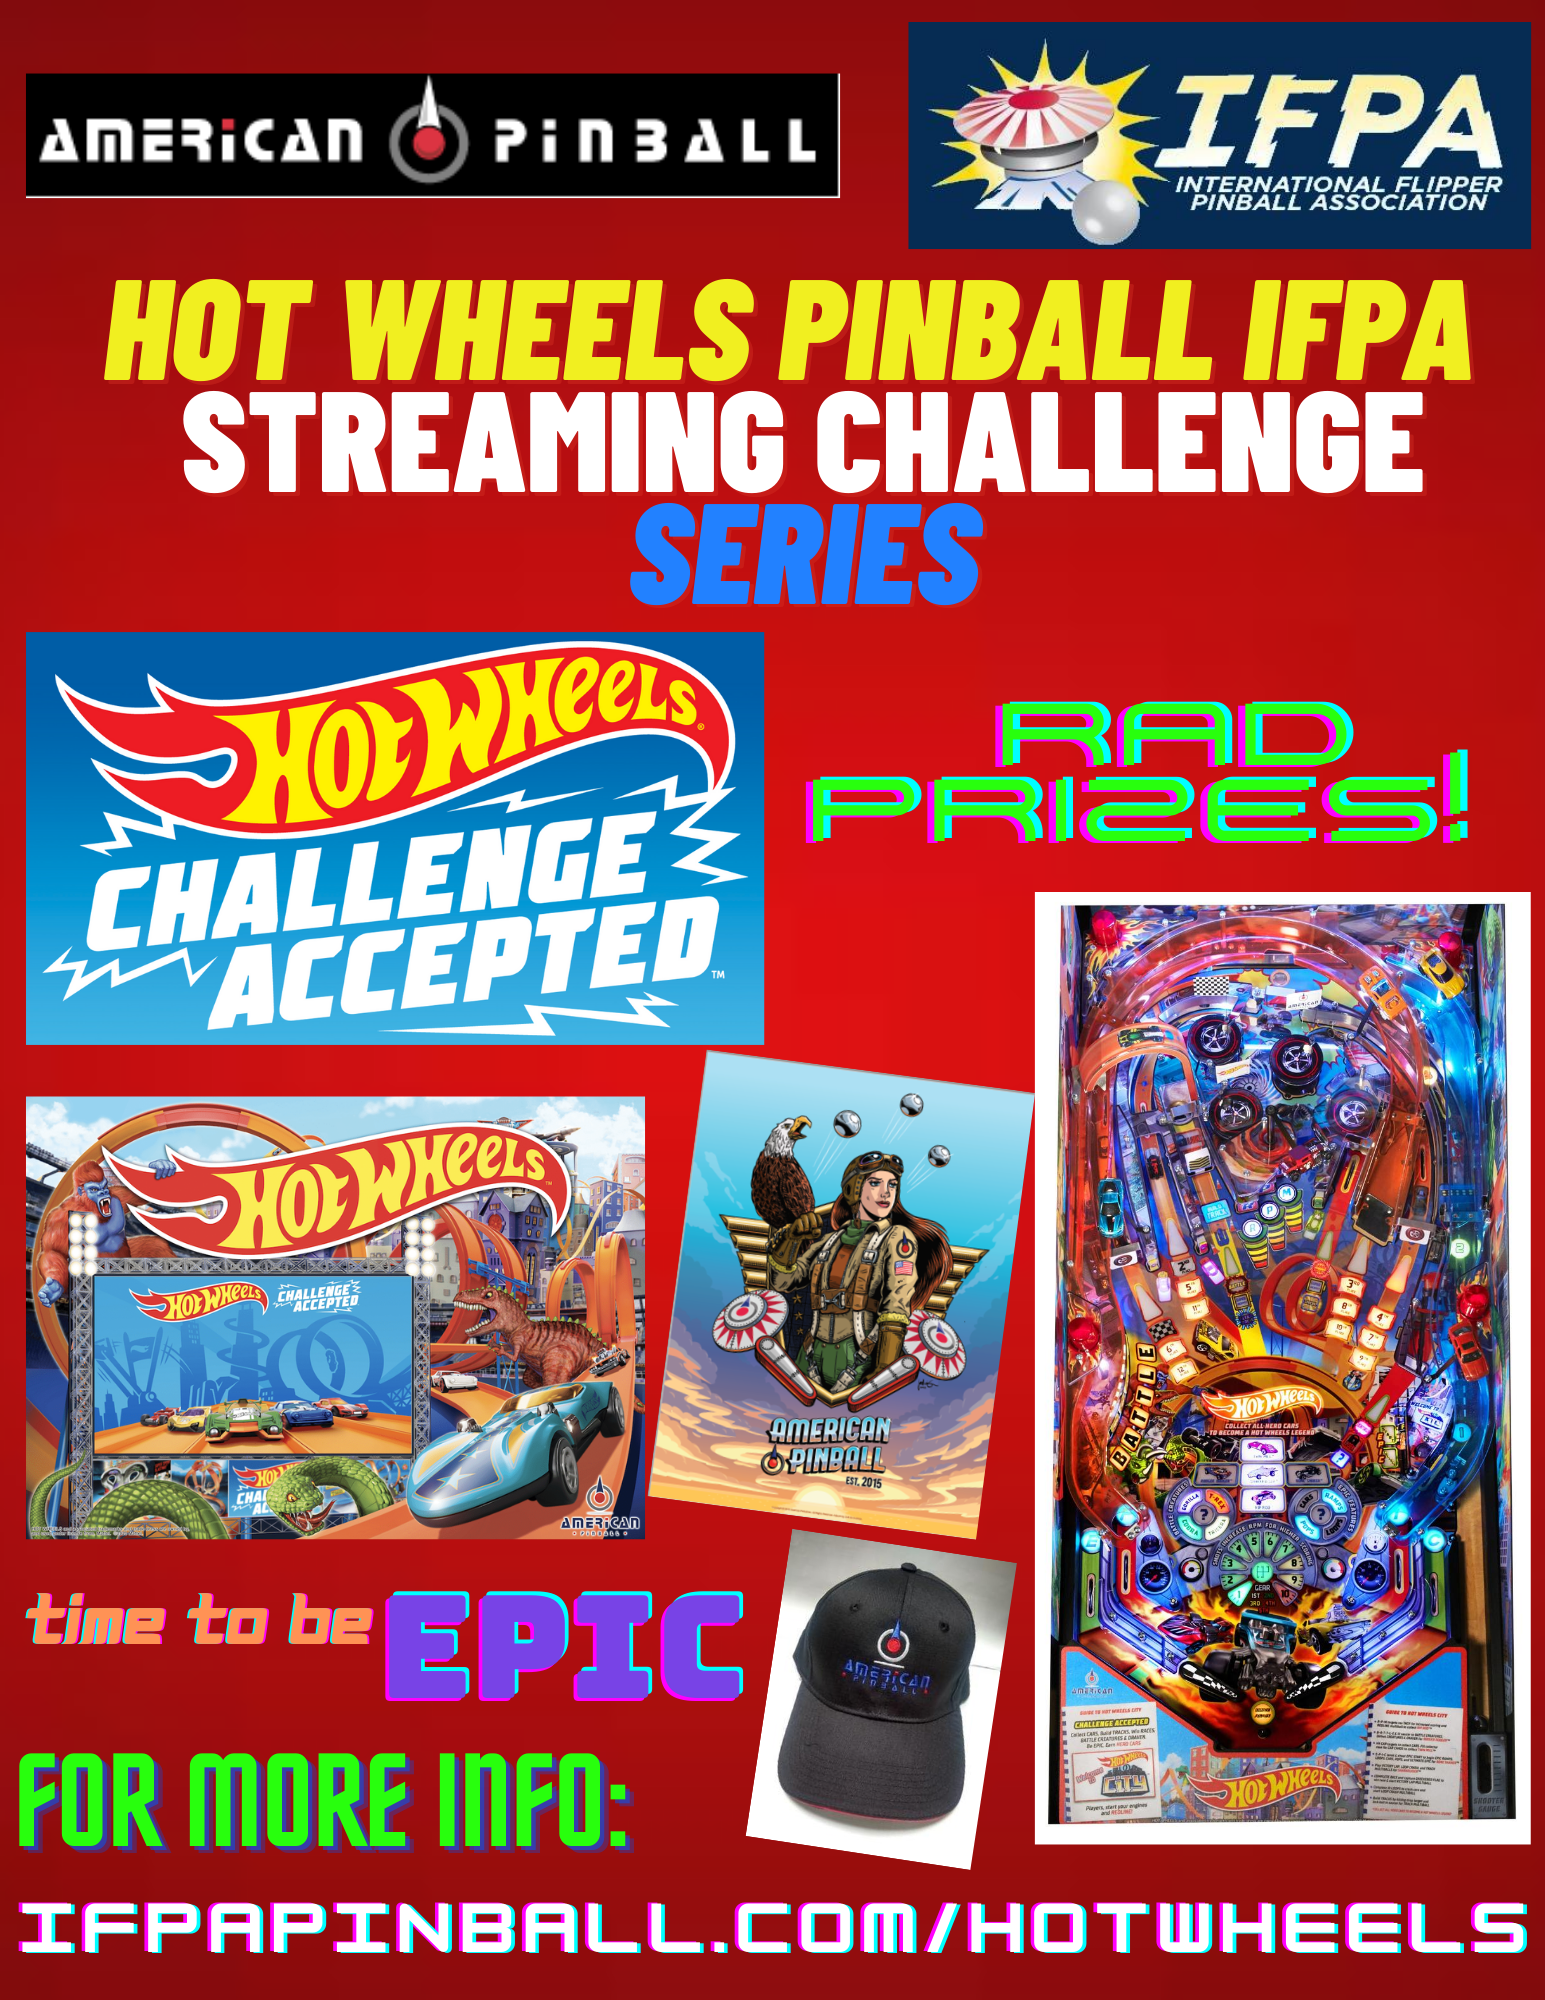 AP Teams Up with International Flipper Pinball Assoc. (IFPA) to Launch Hot Wheels Pinball IFPA Livestreaming Challenge Series